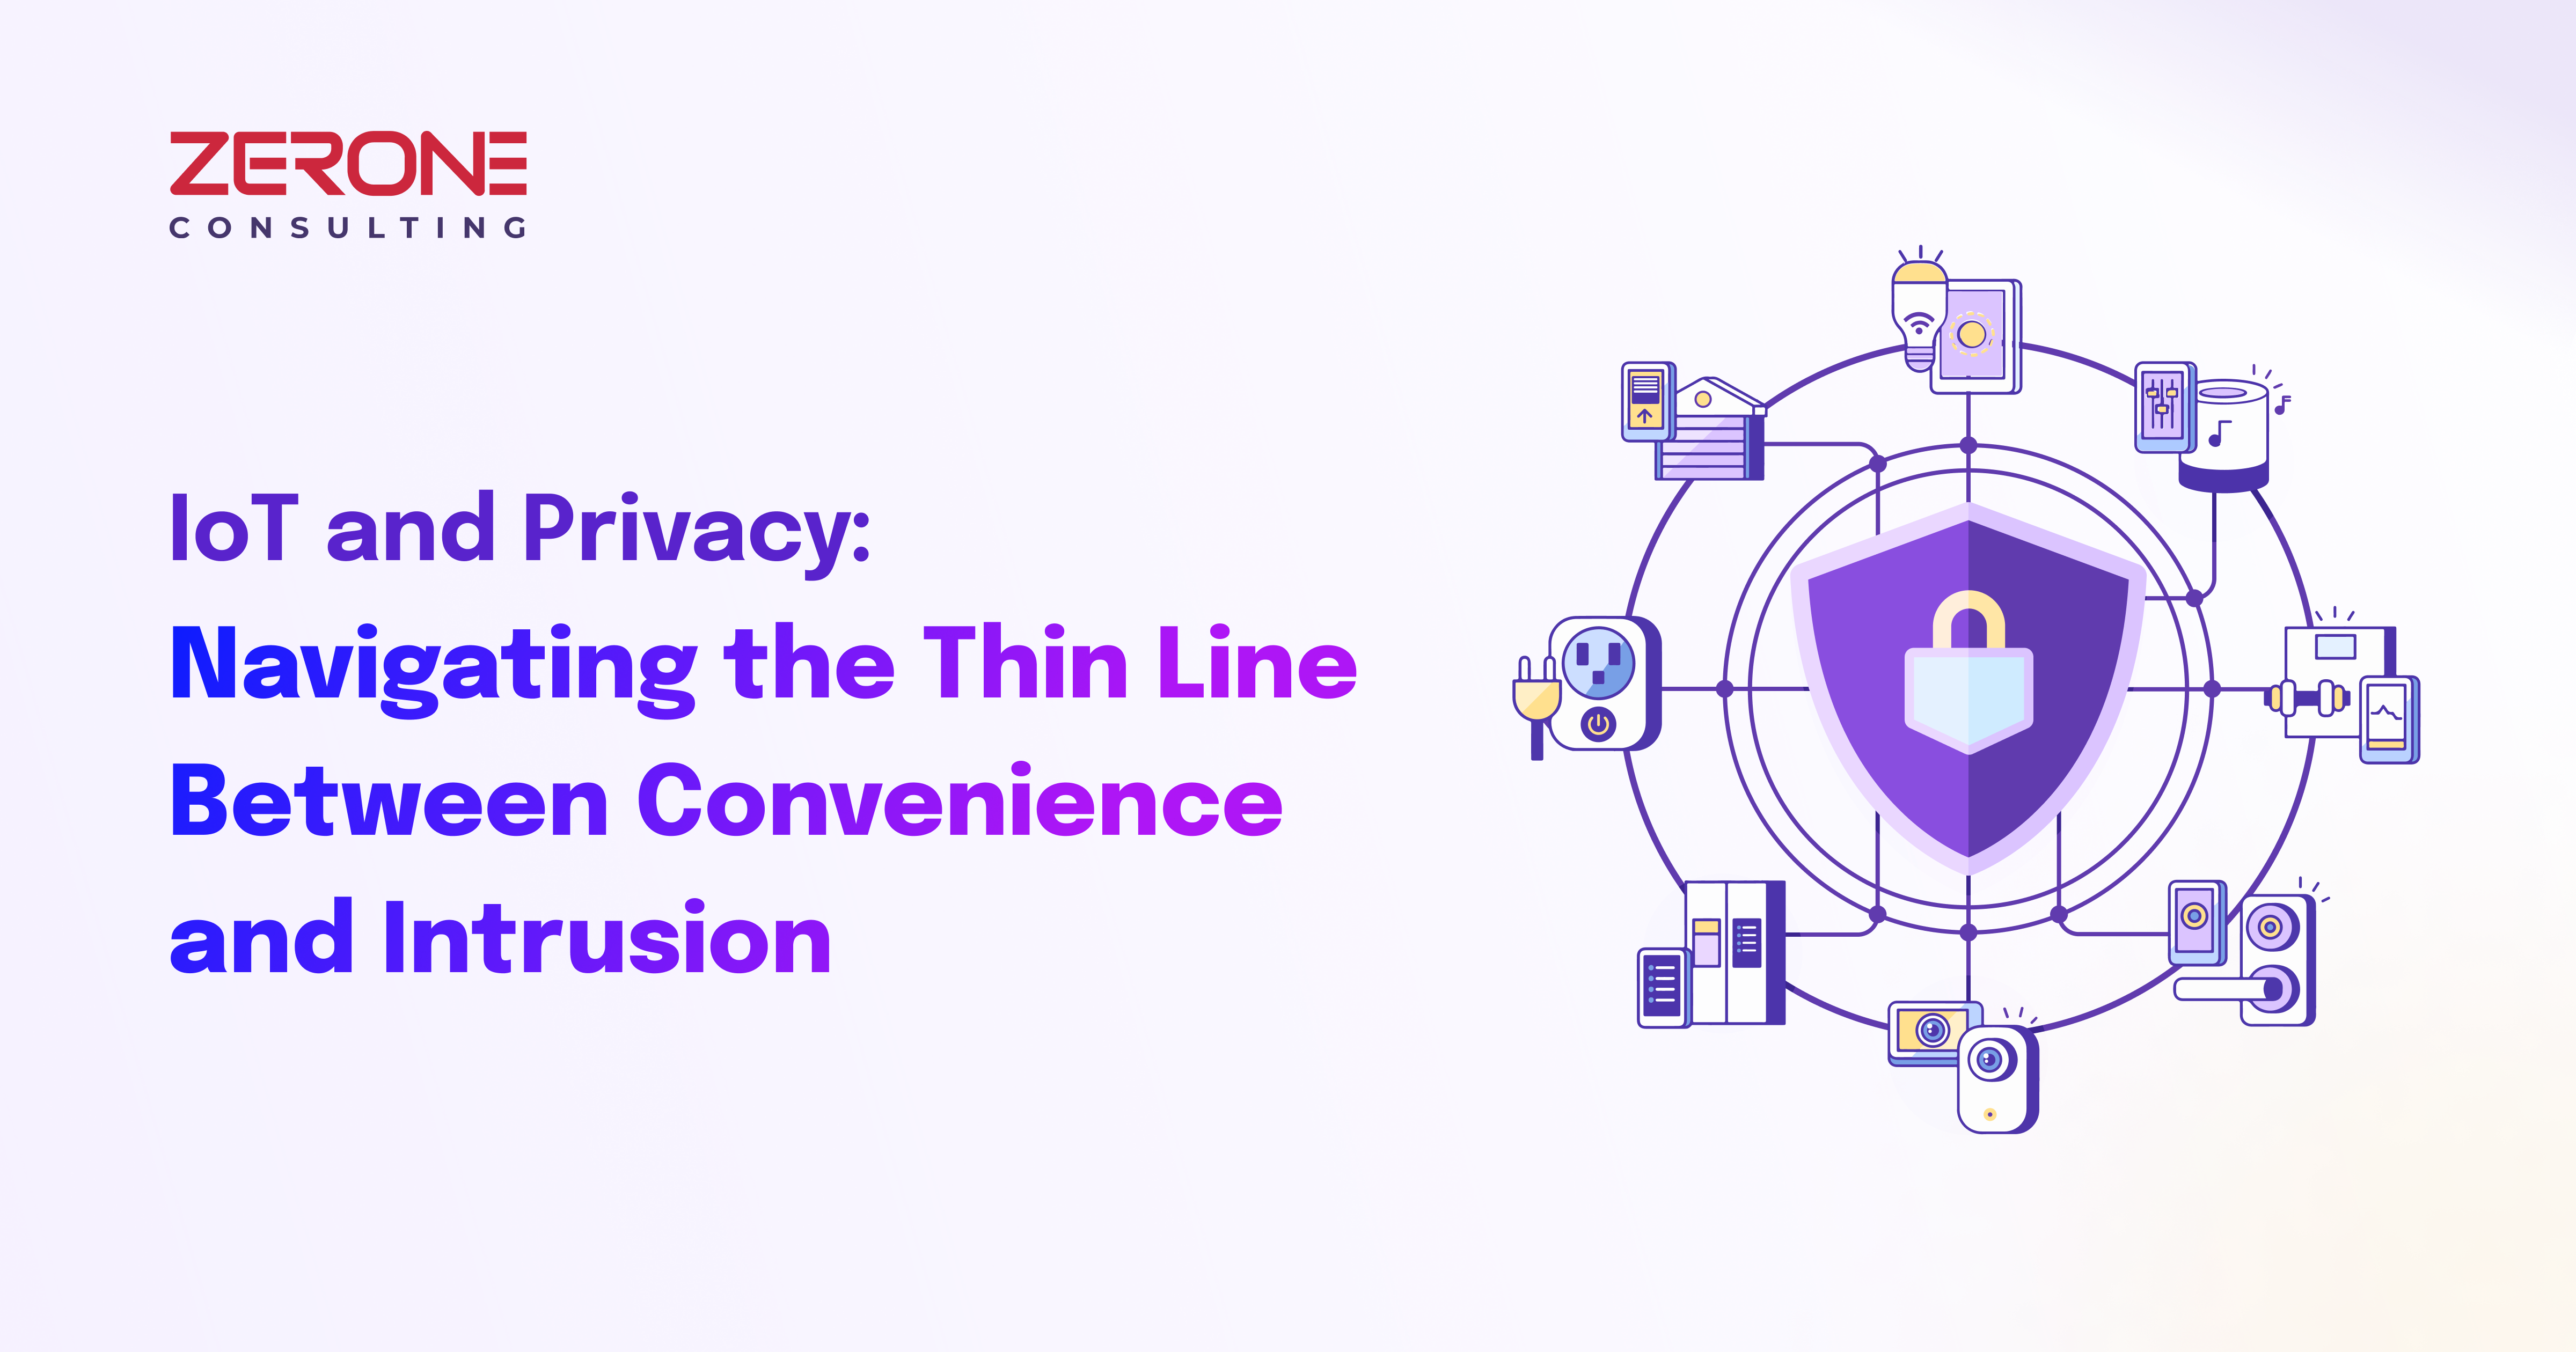 IoT and Privacy: Navigating the Thin Line Between Convenience and Intrusion